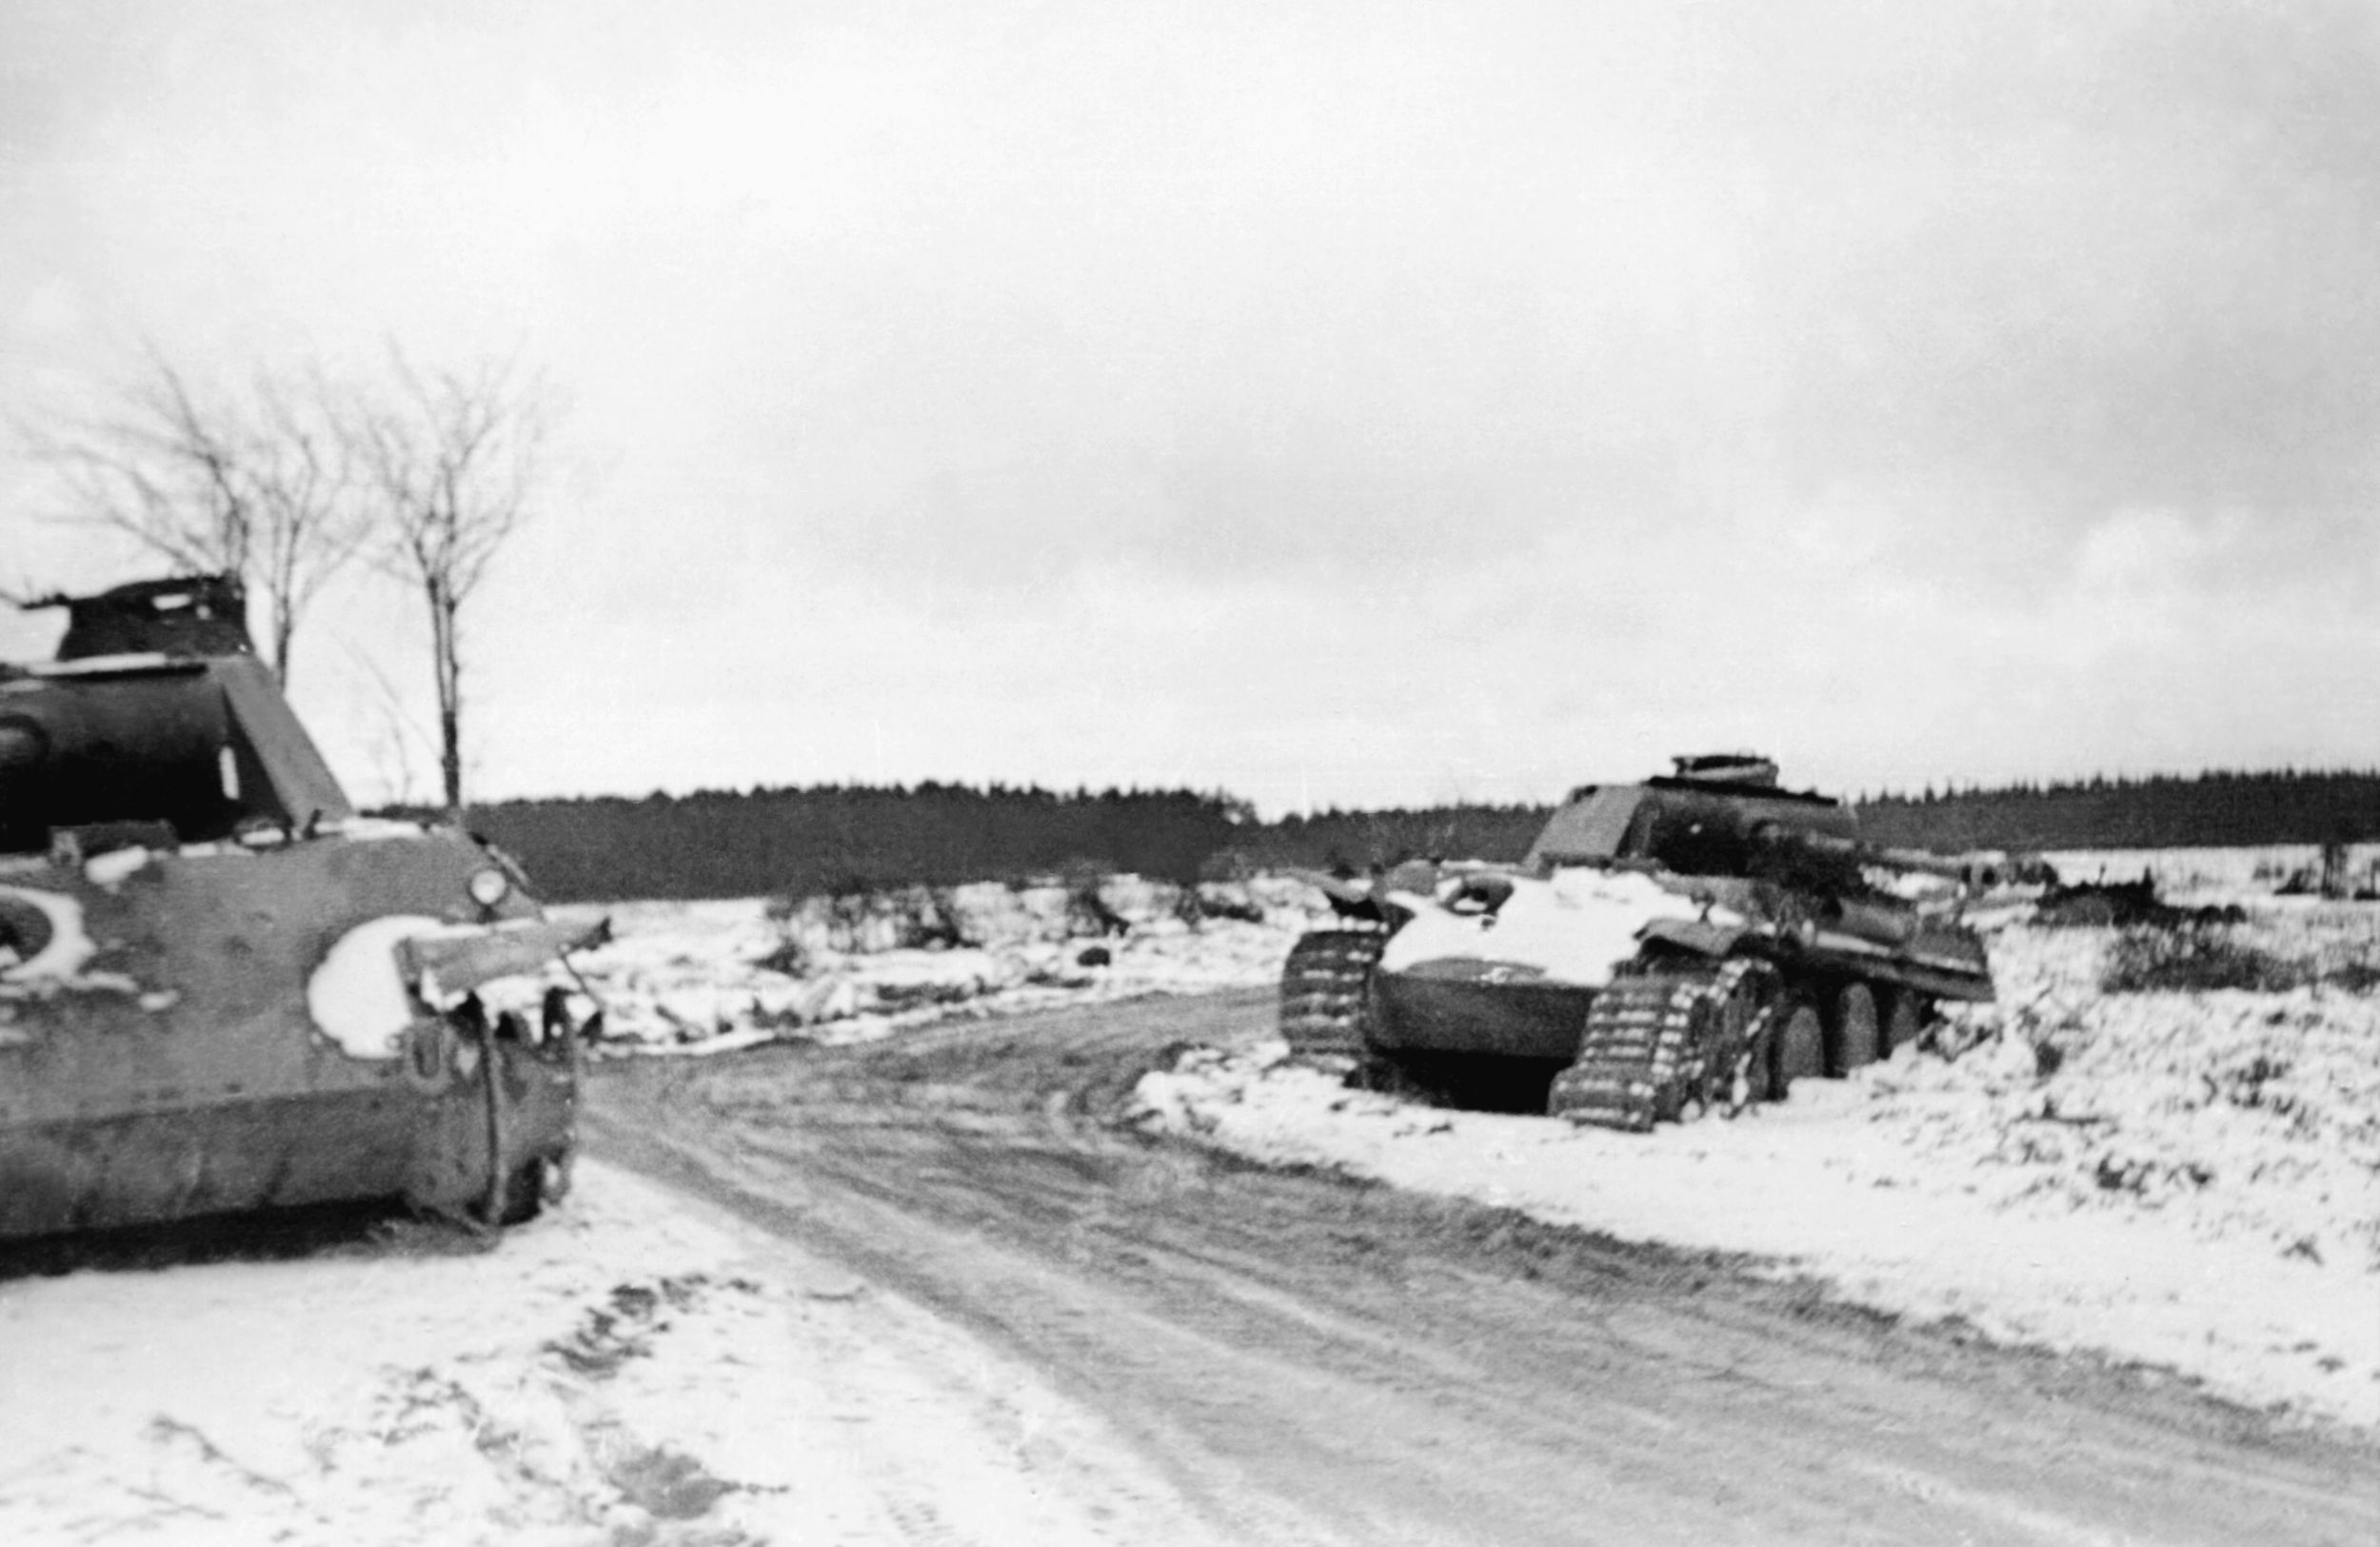 The battered hulks of Panther tanks 127 (left) and 135 lie abandoned at Lausdell crossroads following the heavy fighting of December 17-18, 1944. The Panther was developed in response to the Soviet T-34 in the East and far outclassed Allied armor on the Western Front.